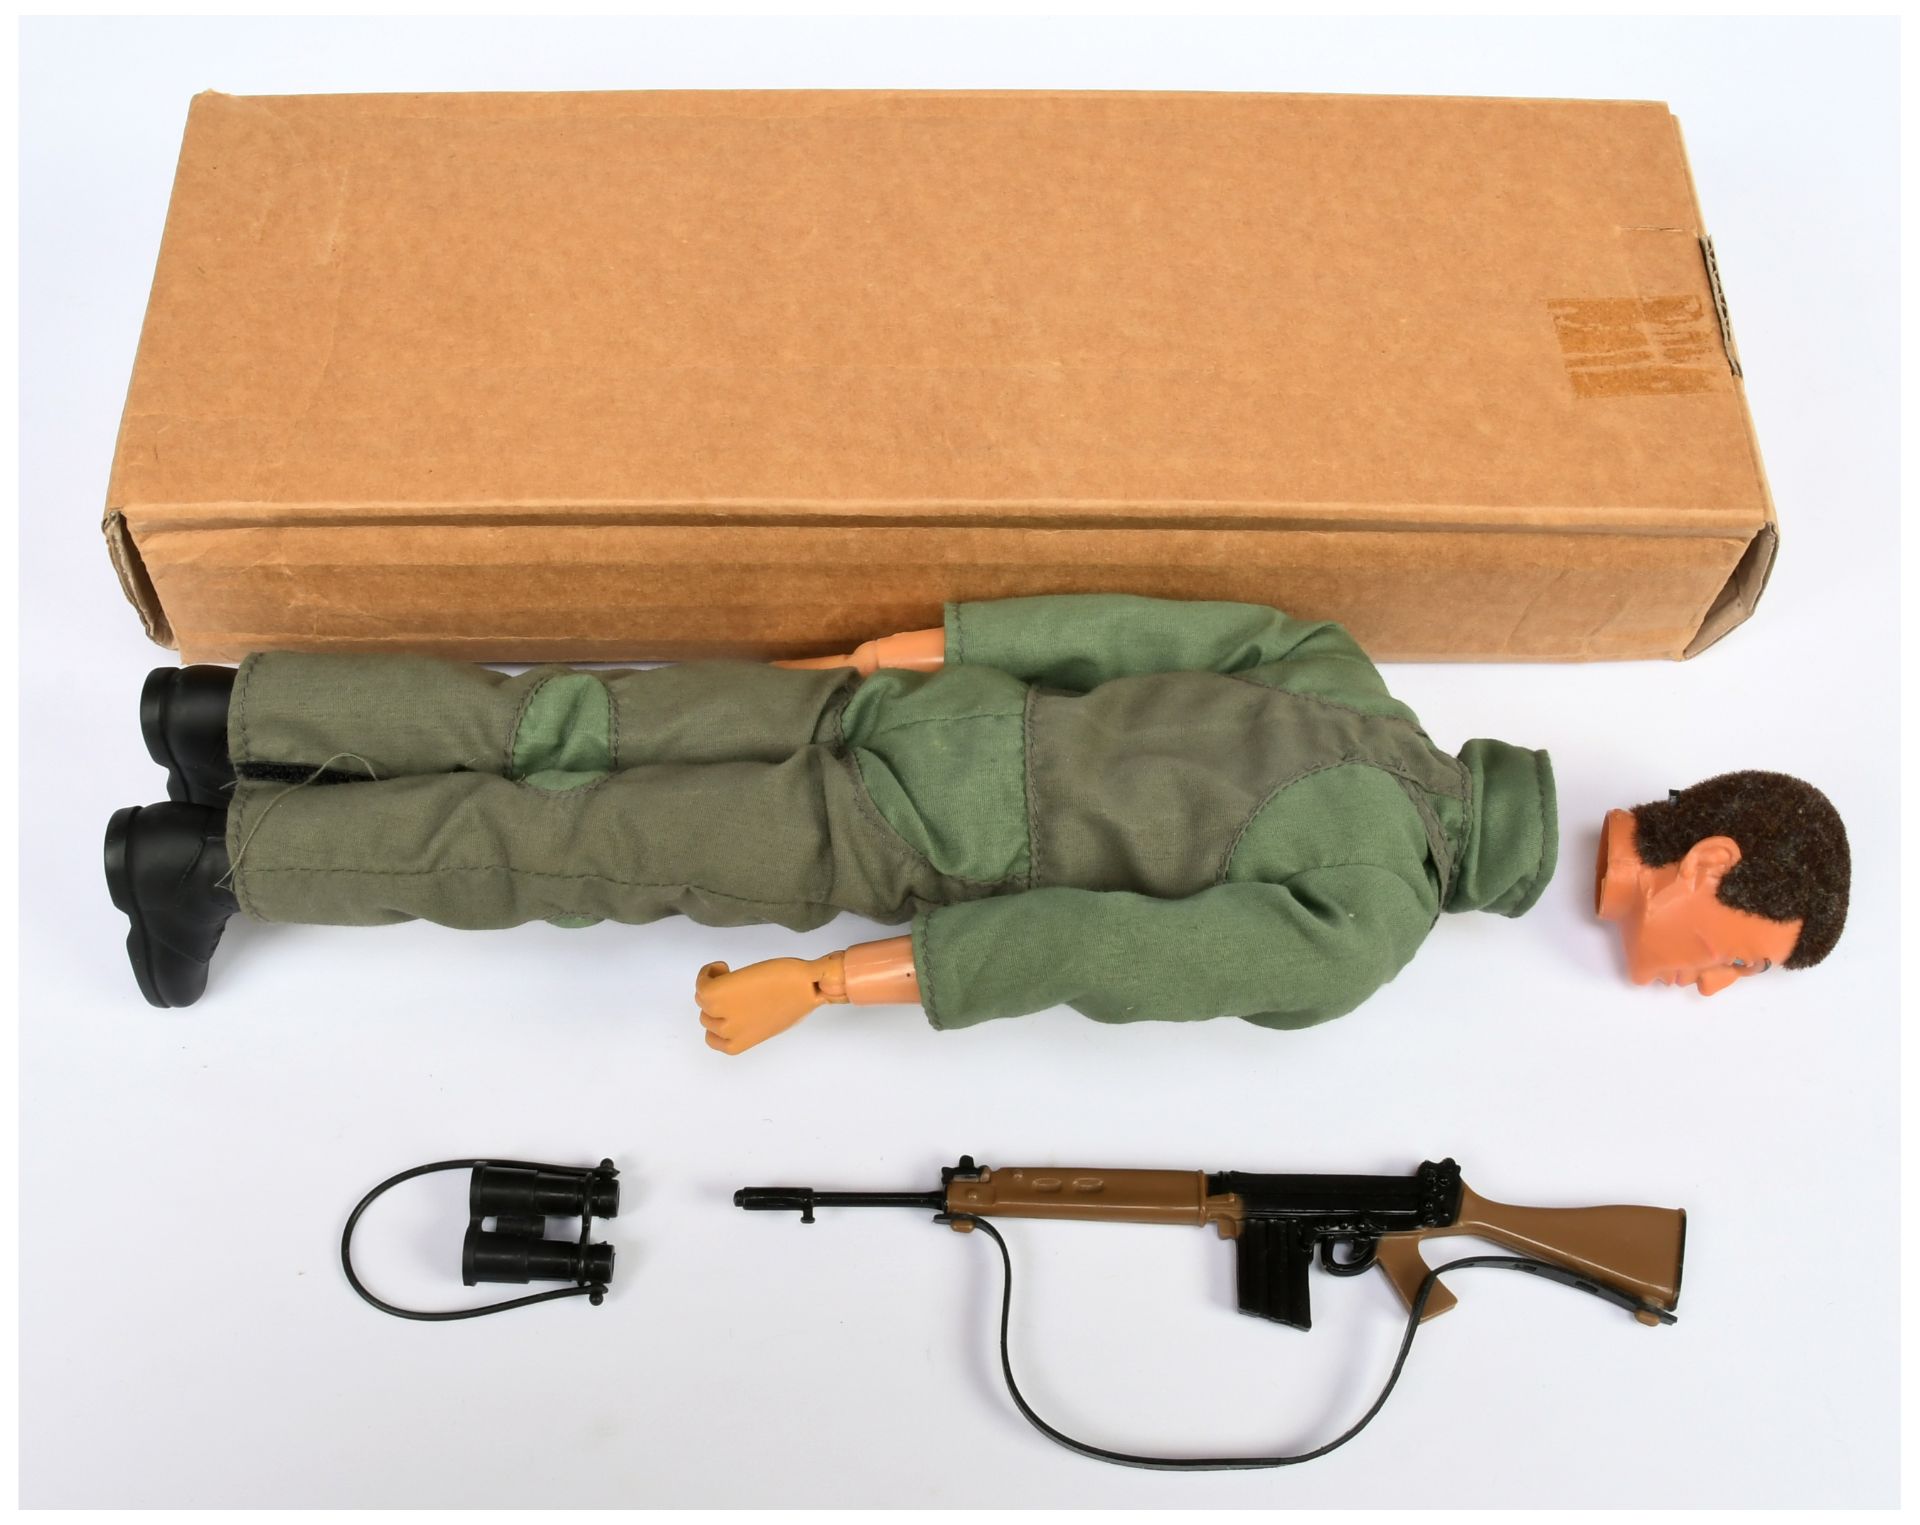 Palitoy Action Man vintage figure - dynamic body with SLR rifle and binoculars, appears to be dre... - Image 2 of 2